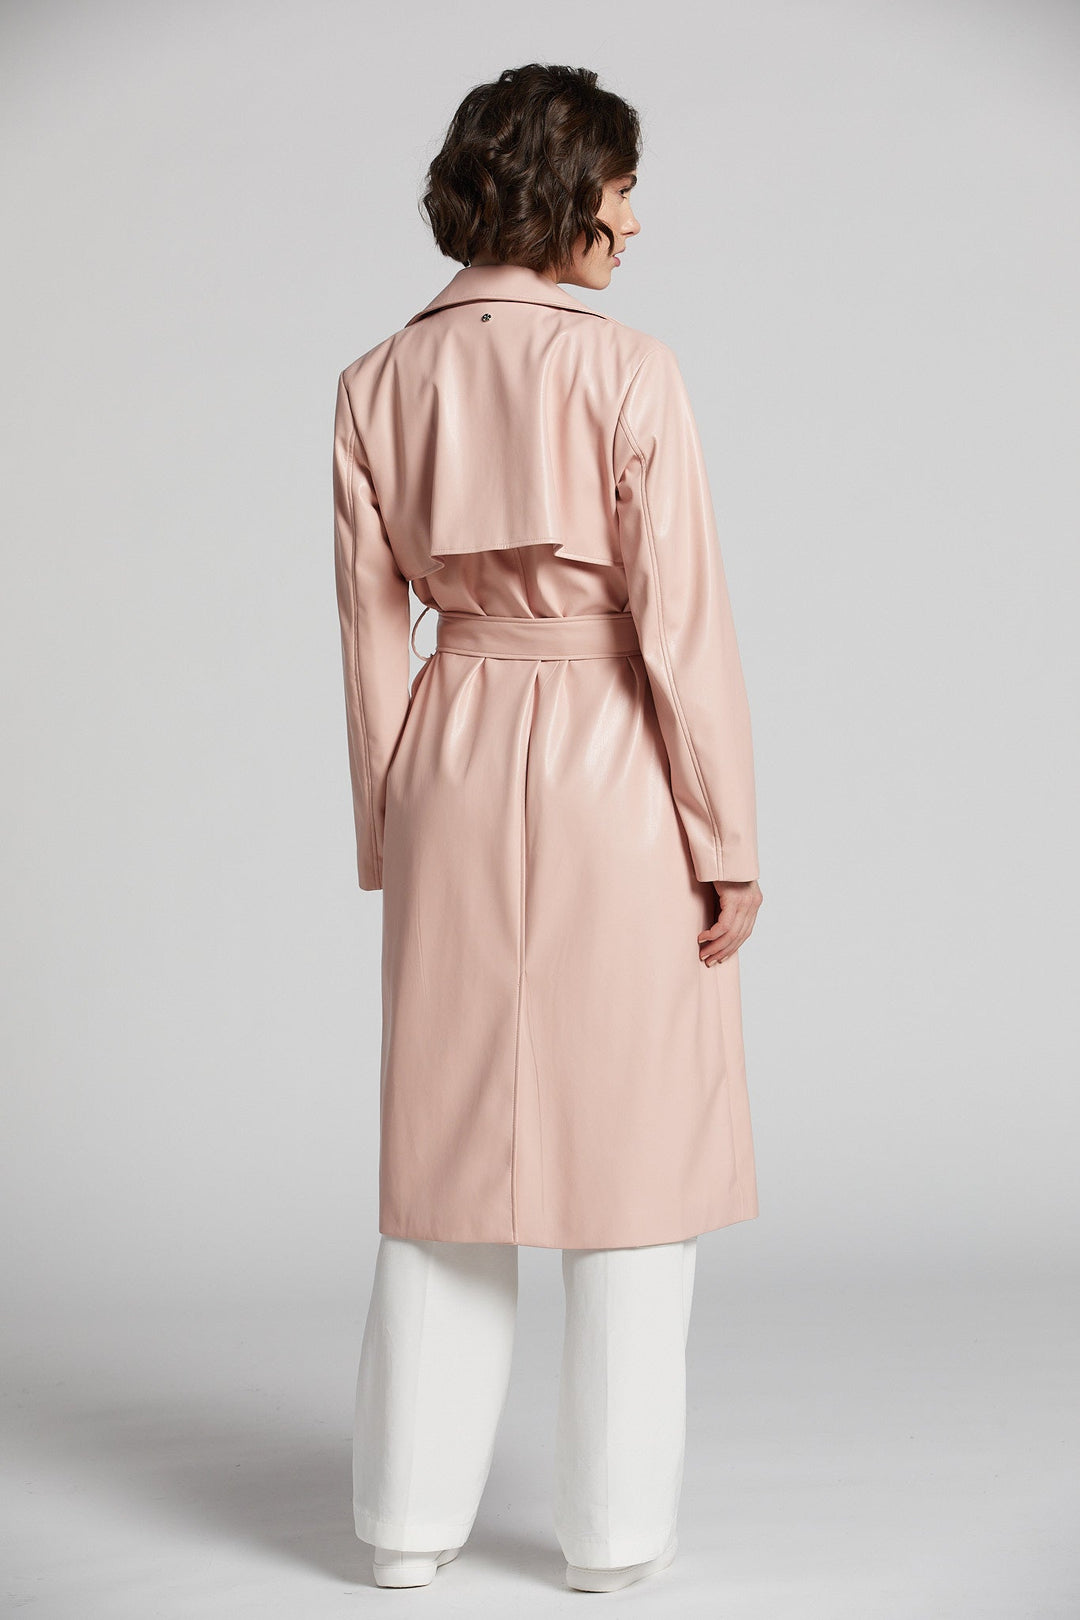 Adroit Atelier Nina Faux Leather Wrap Trench Coat in Blush